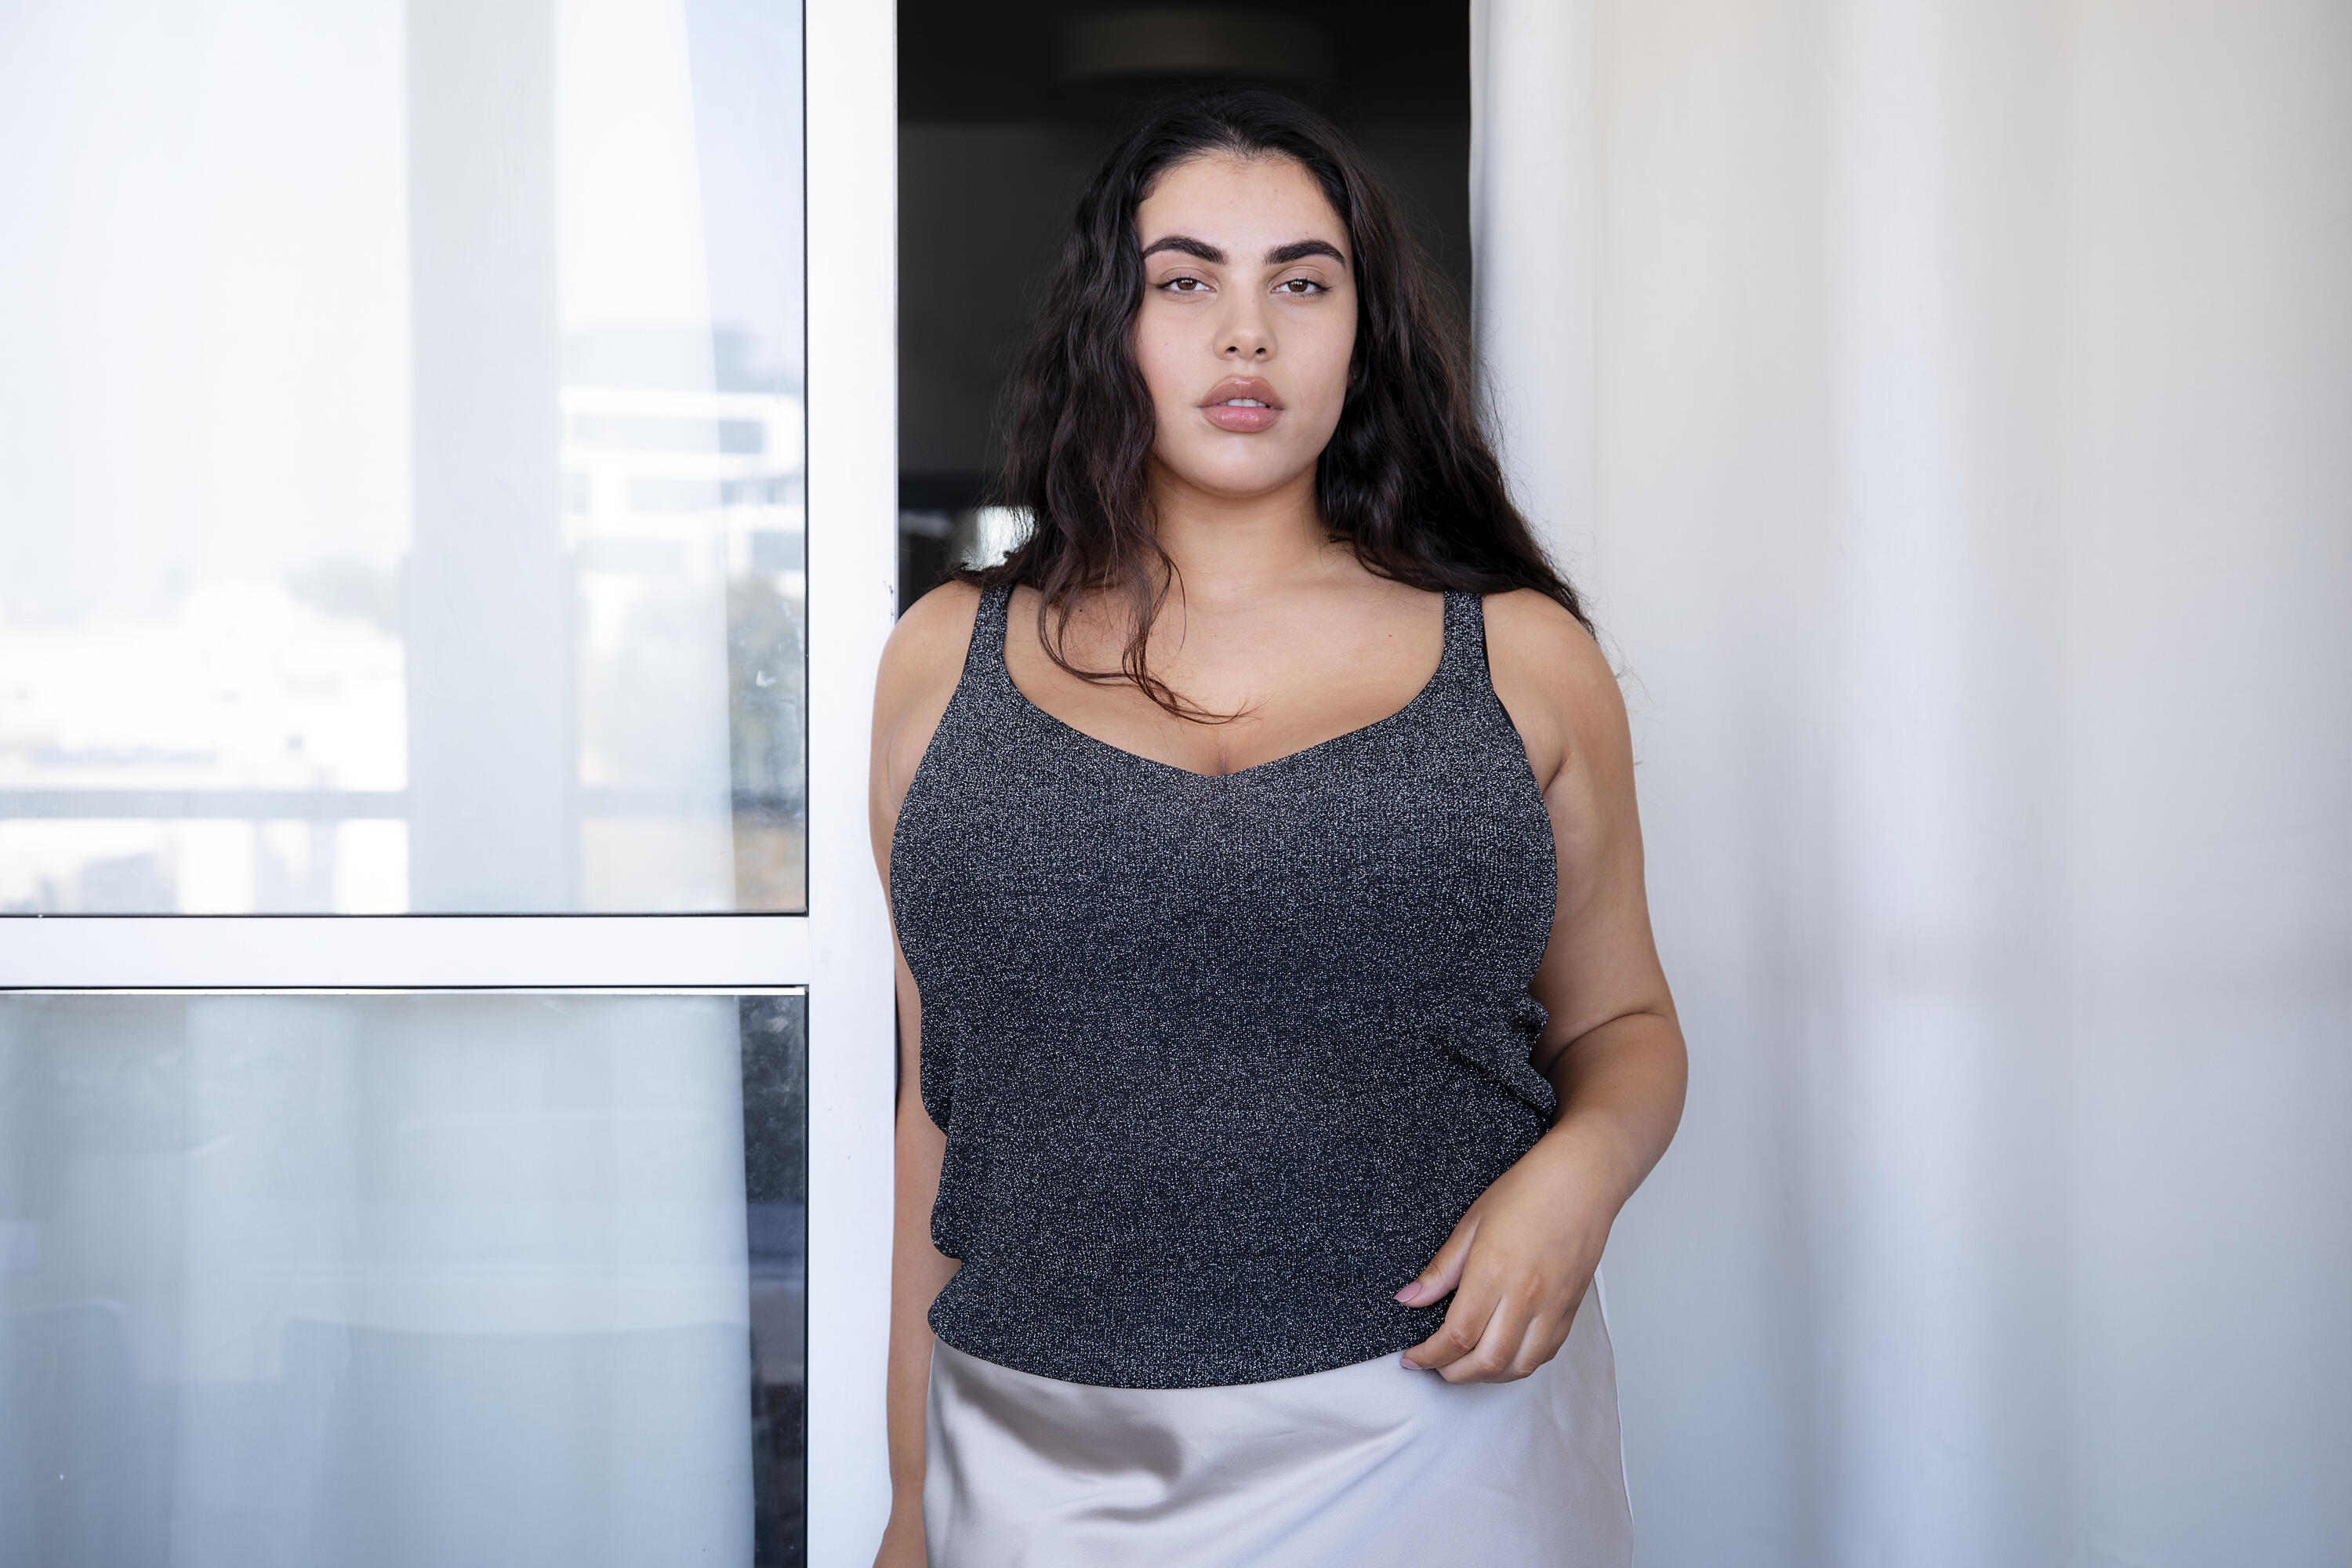 Women's Plus-Size Featured Brands